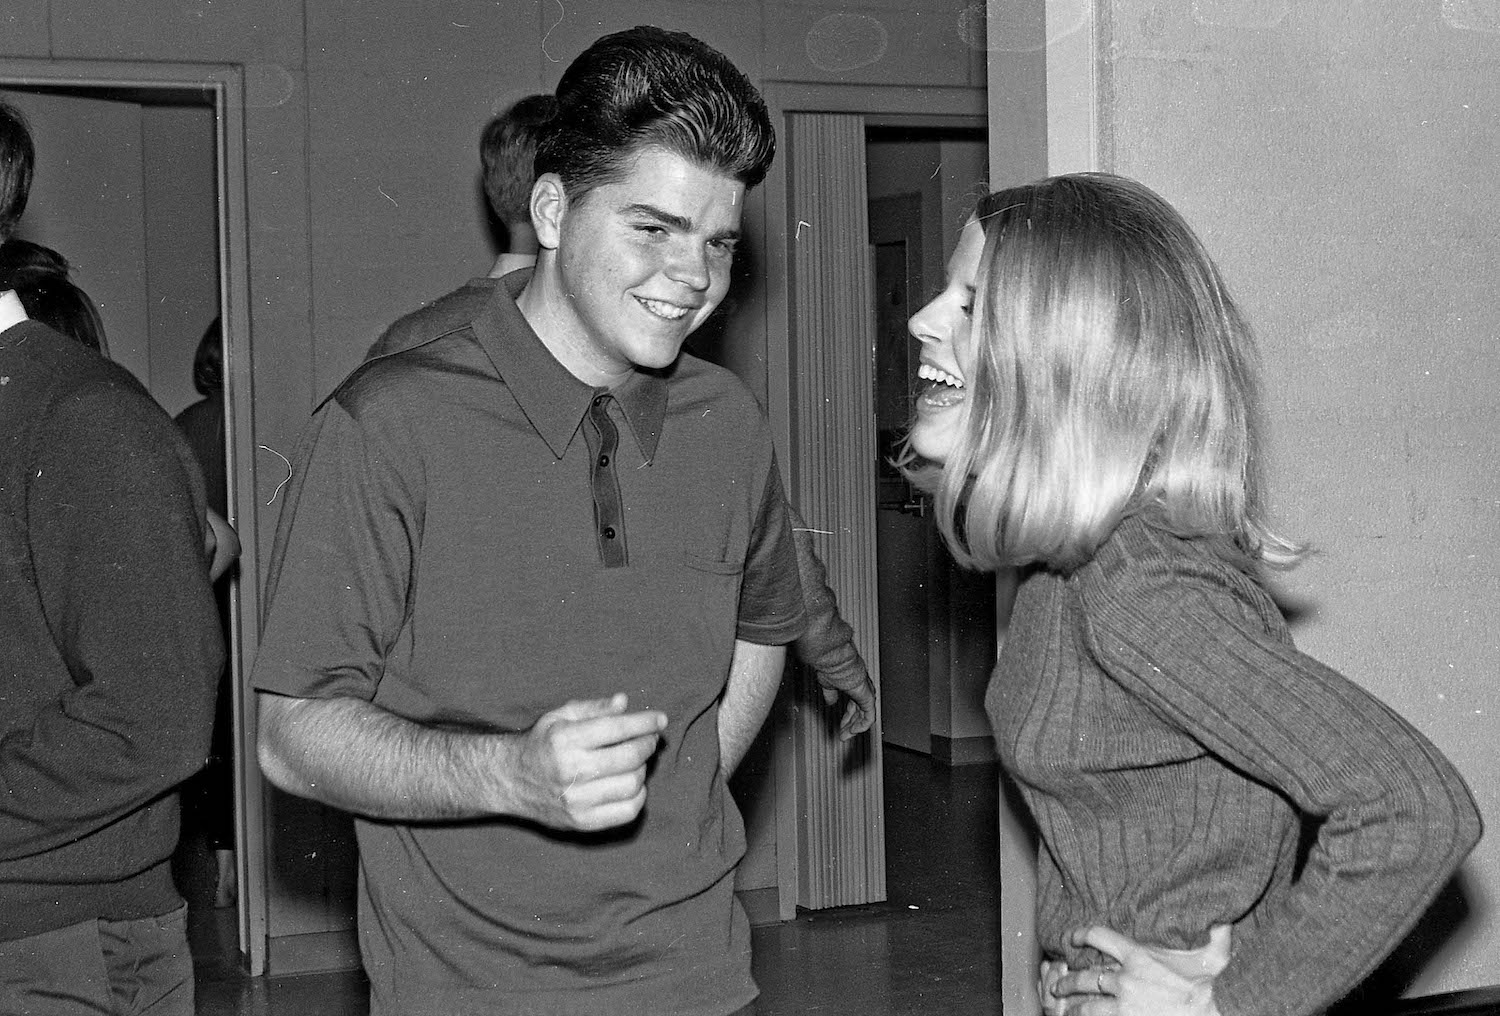 Spring 1965--At a dance party--Fresno State College